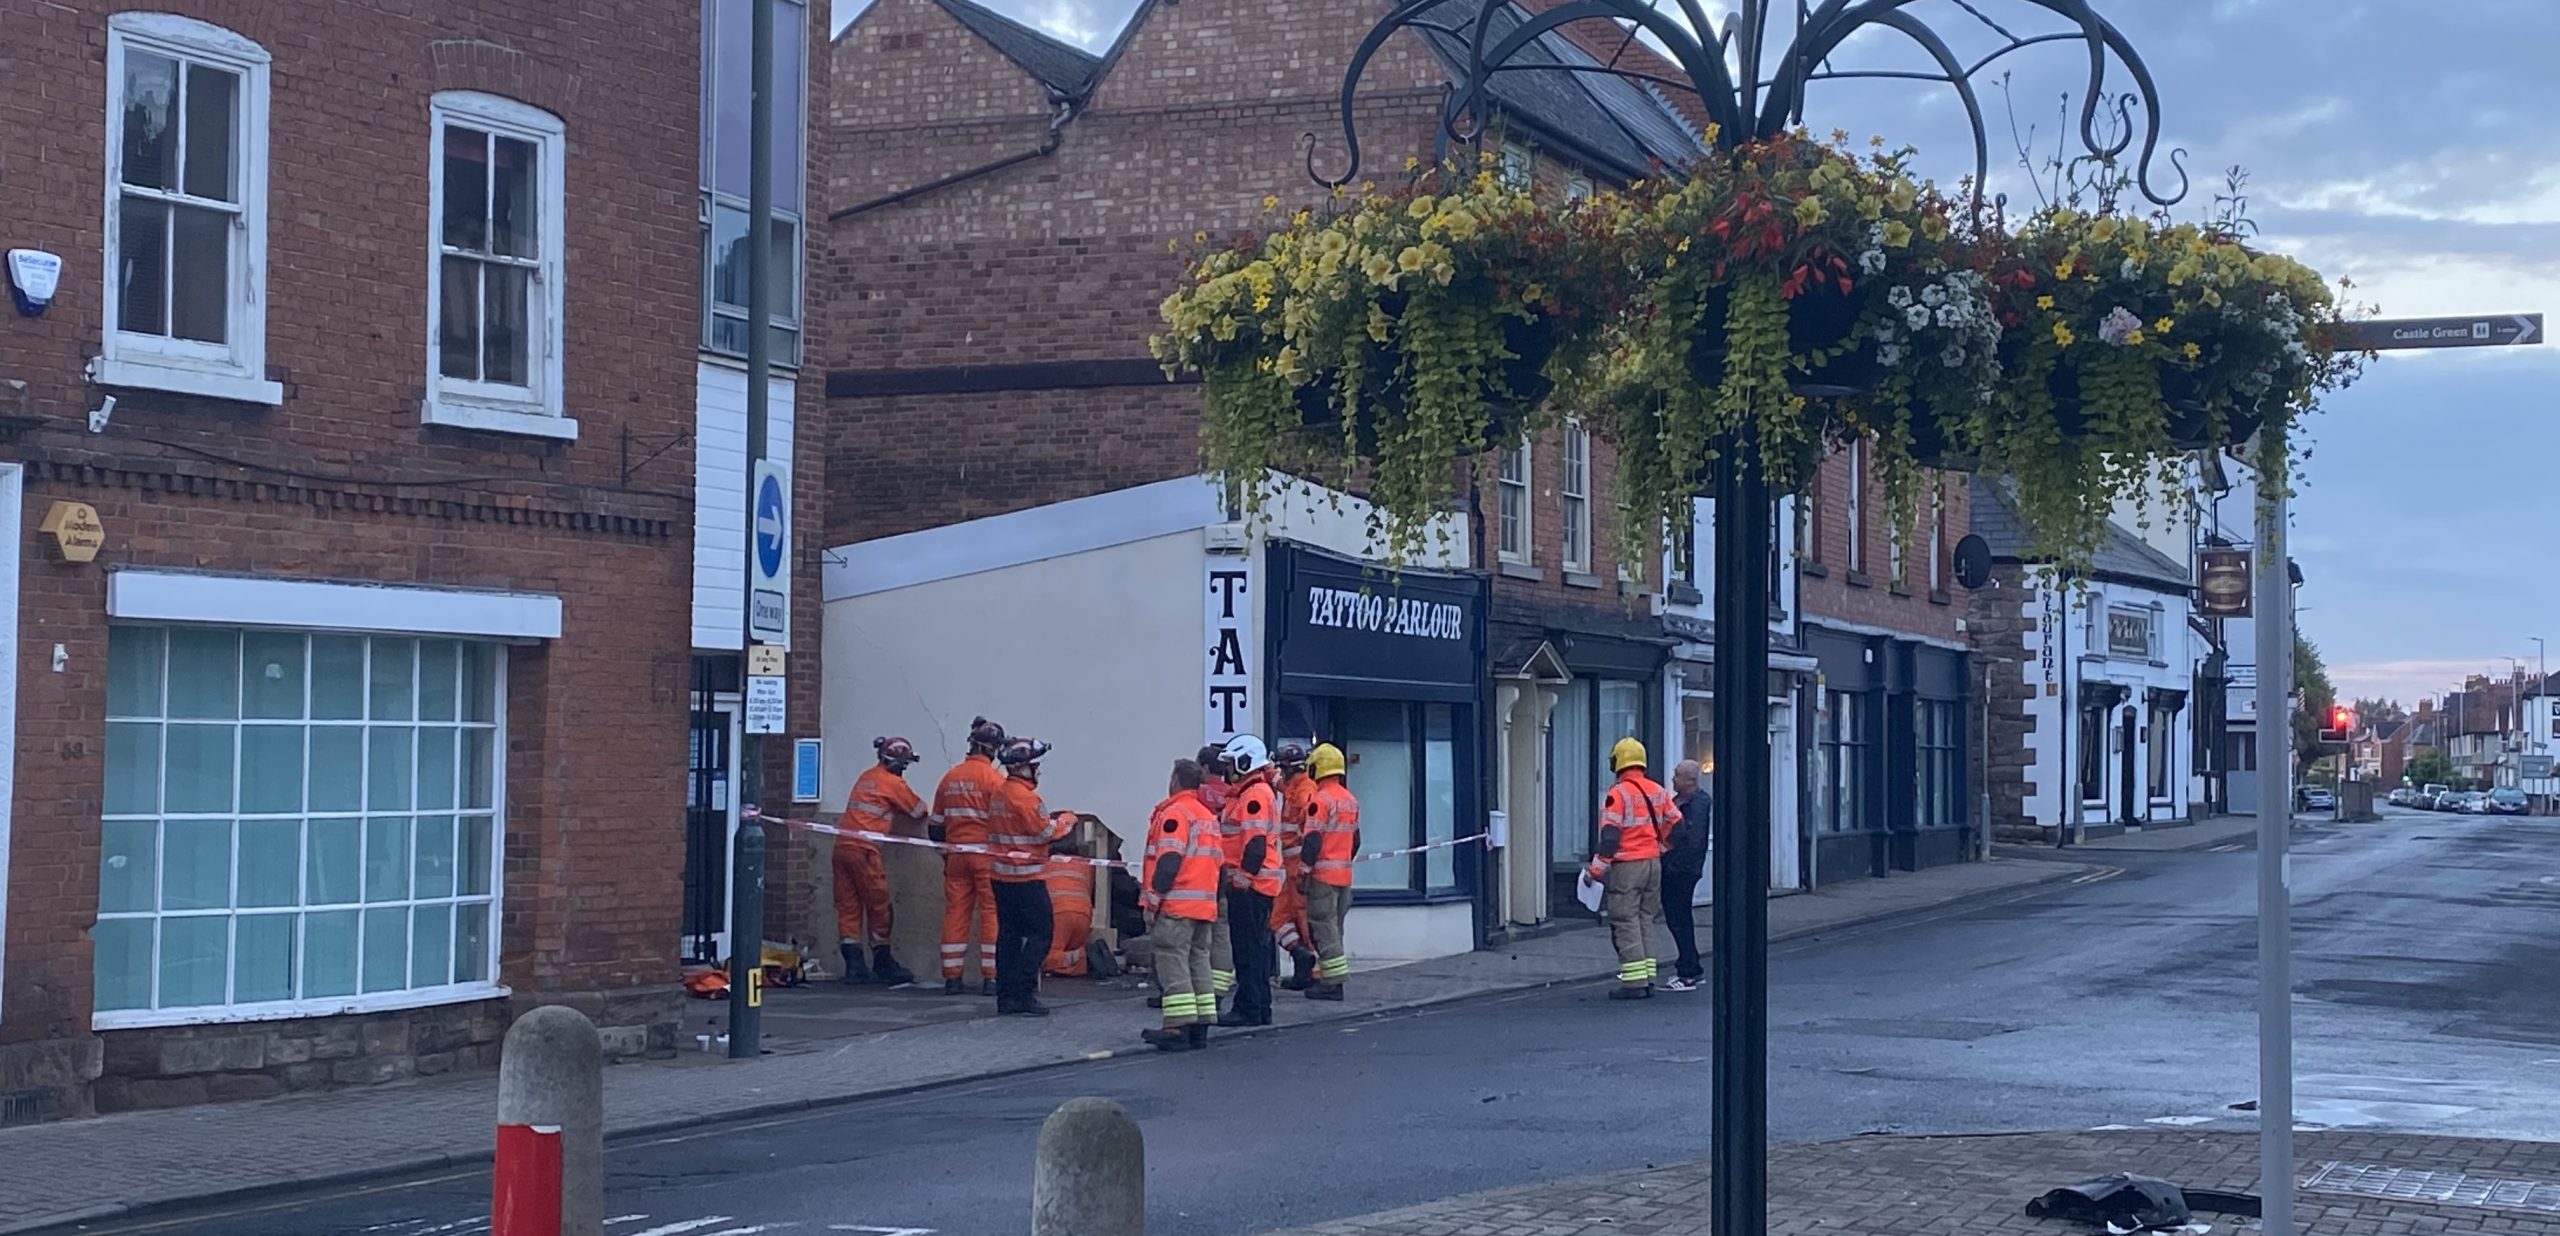 LATEST | Hereford & Worcester Fire and Rescue Service provide update after car hits building in Hereford